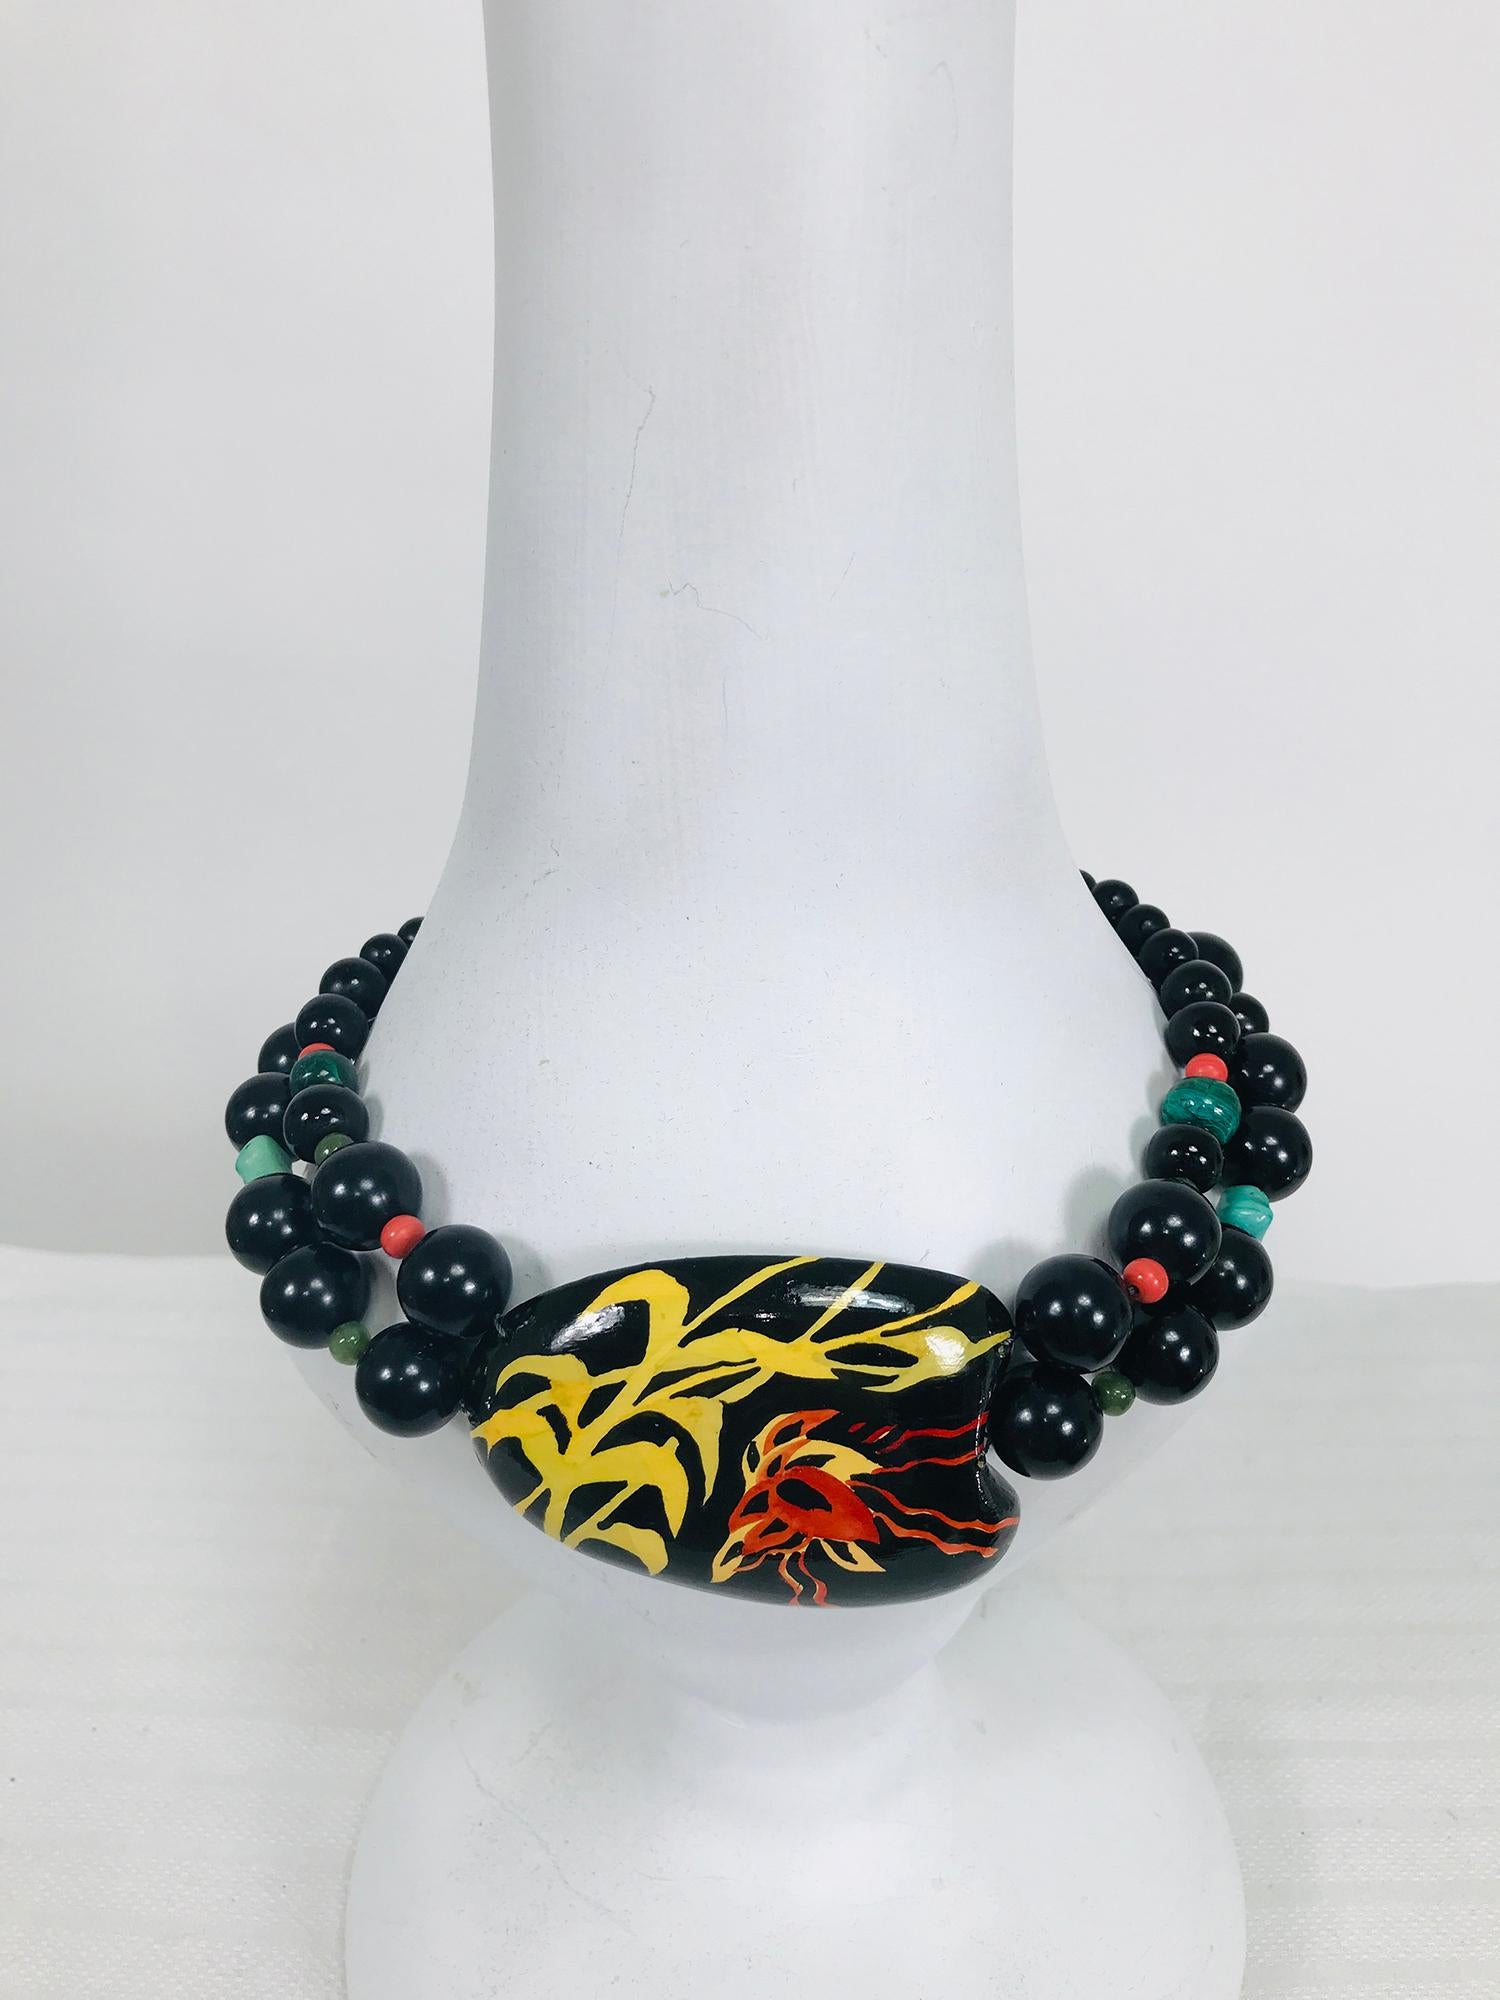 Rafael Sanchez hand painted coconut shell choker necklace with beads and a clasp marked silver from the 1980s. Black lacquer coconut shell cut in an abstract shape is painted with tropical fronds. 
Measurements are in inches
Length end to end 17 1/2